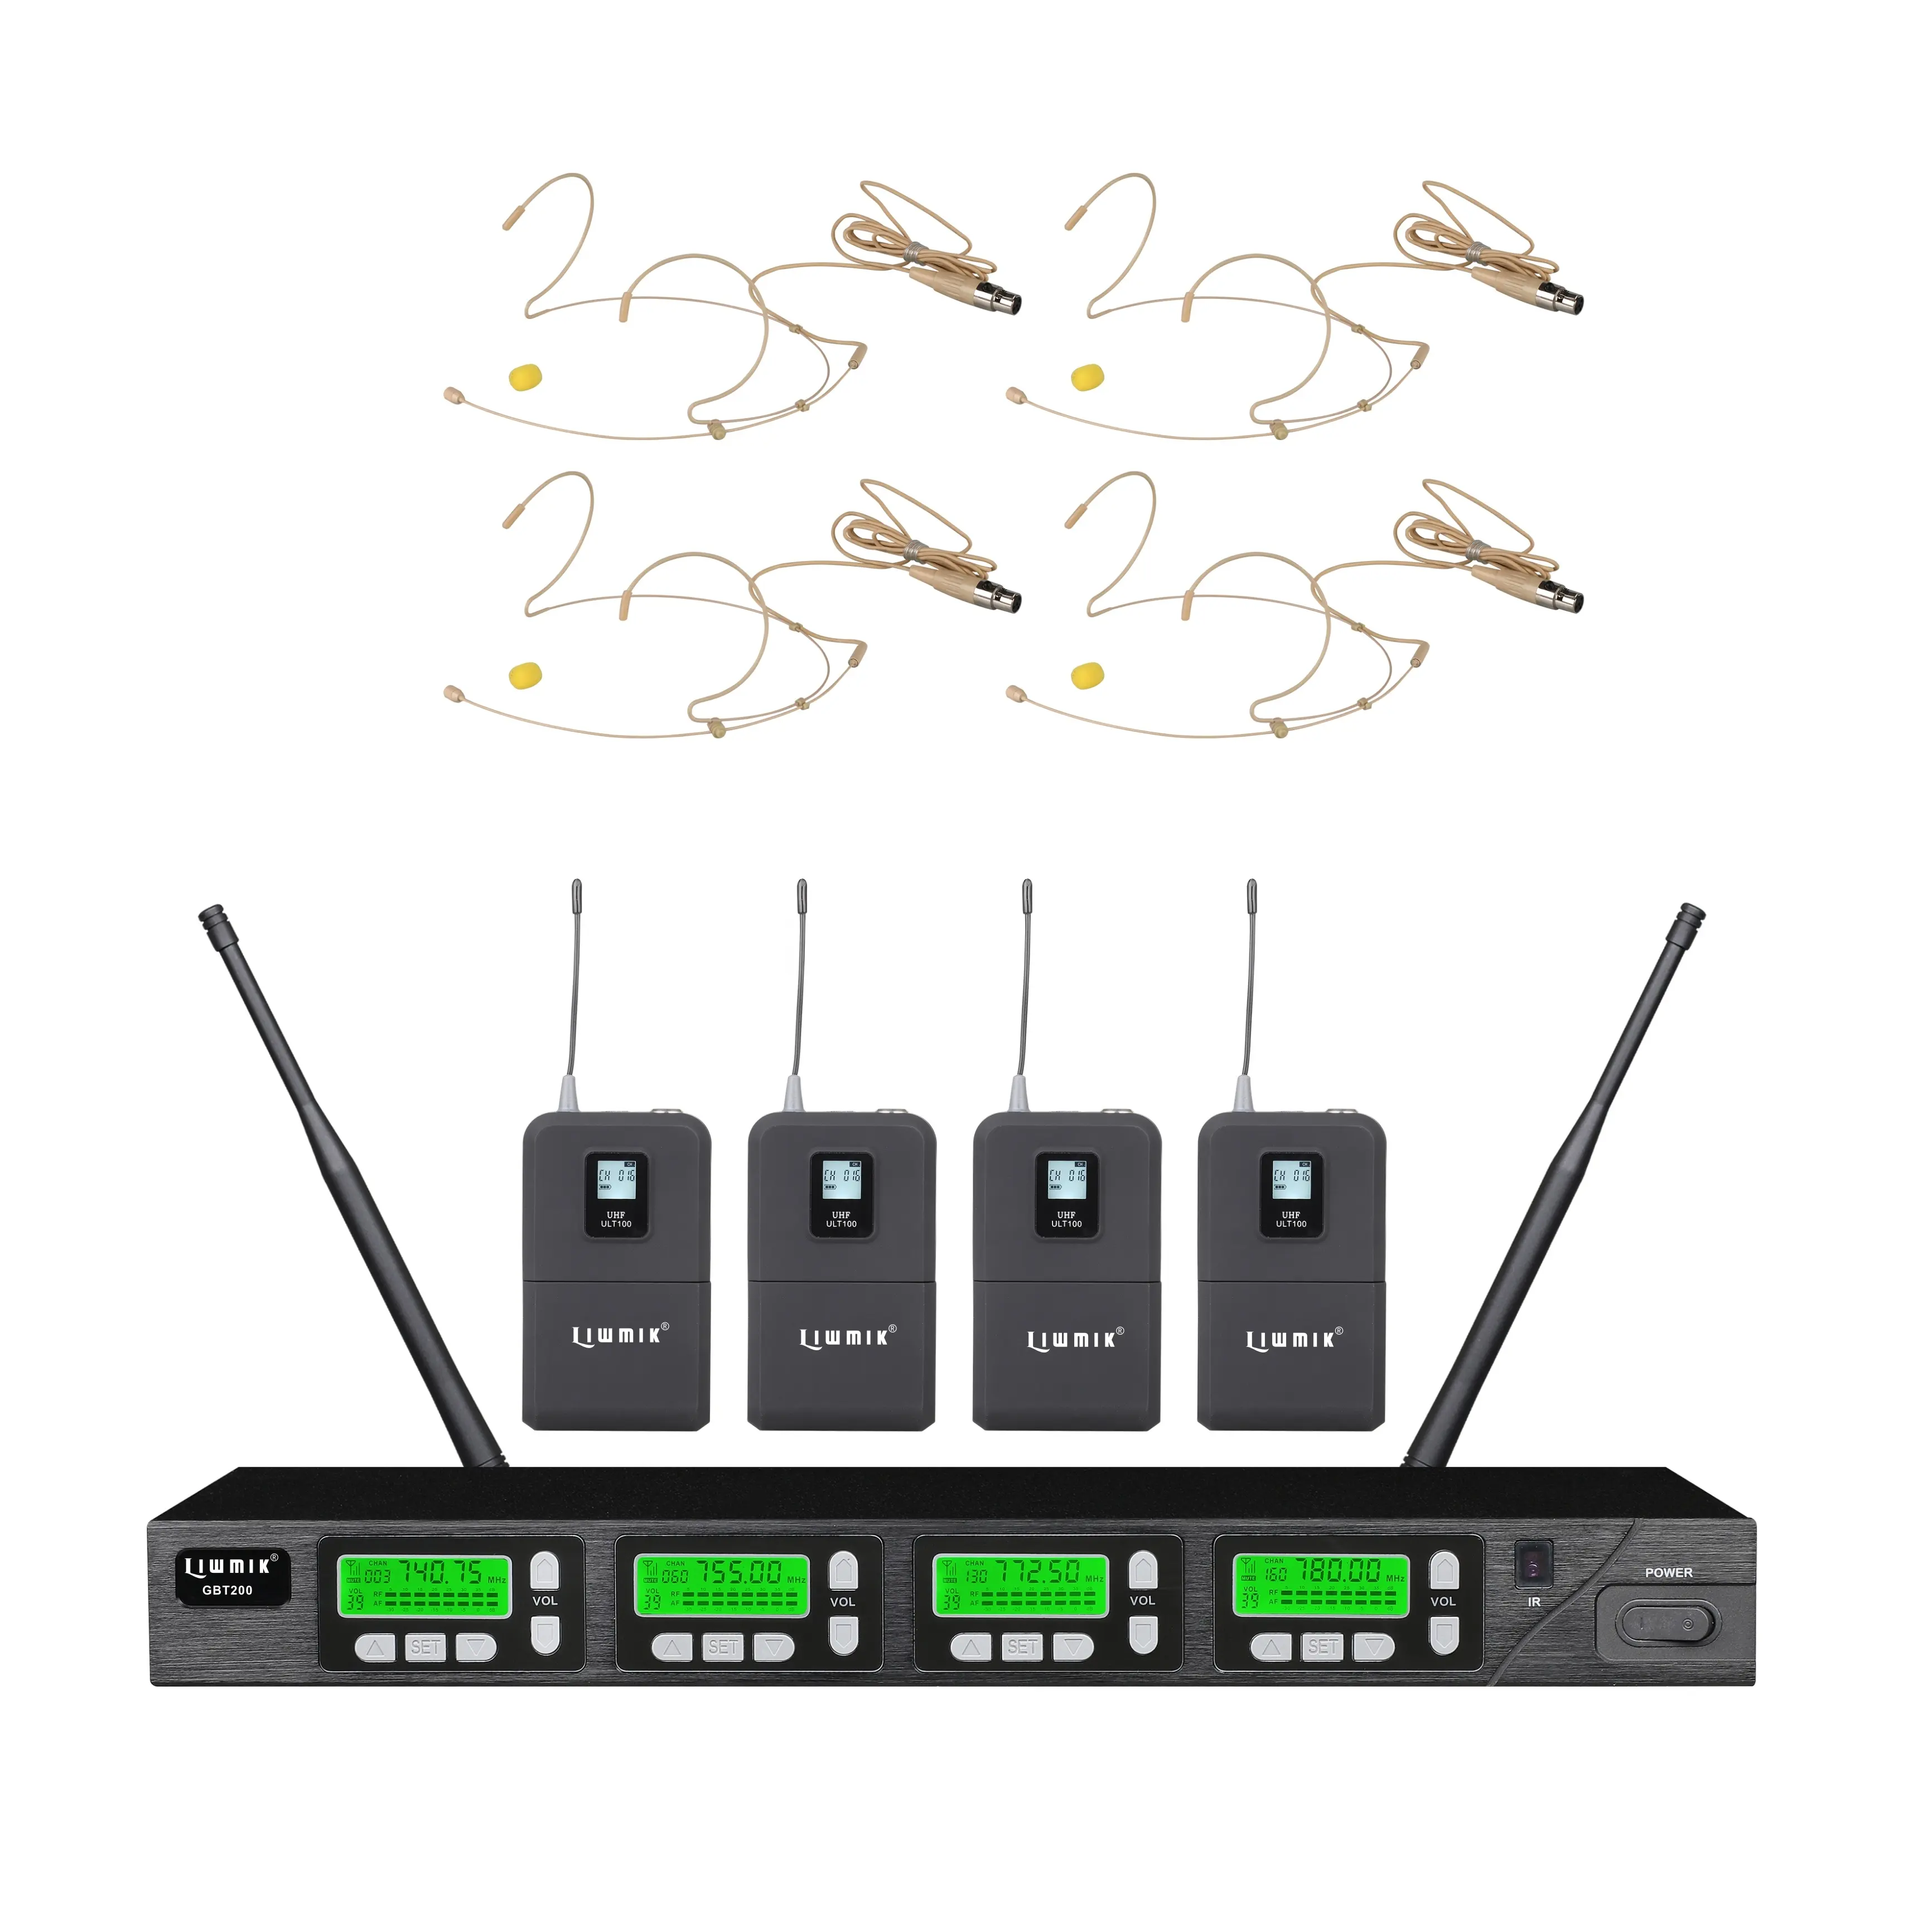 UB3800 UHF Professional Four-Channel Cordless PLL Wireless Microphone System w/ mini body-pack and headset headphones wide usage